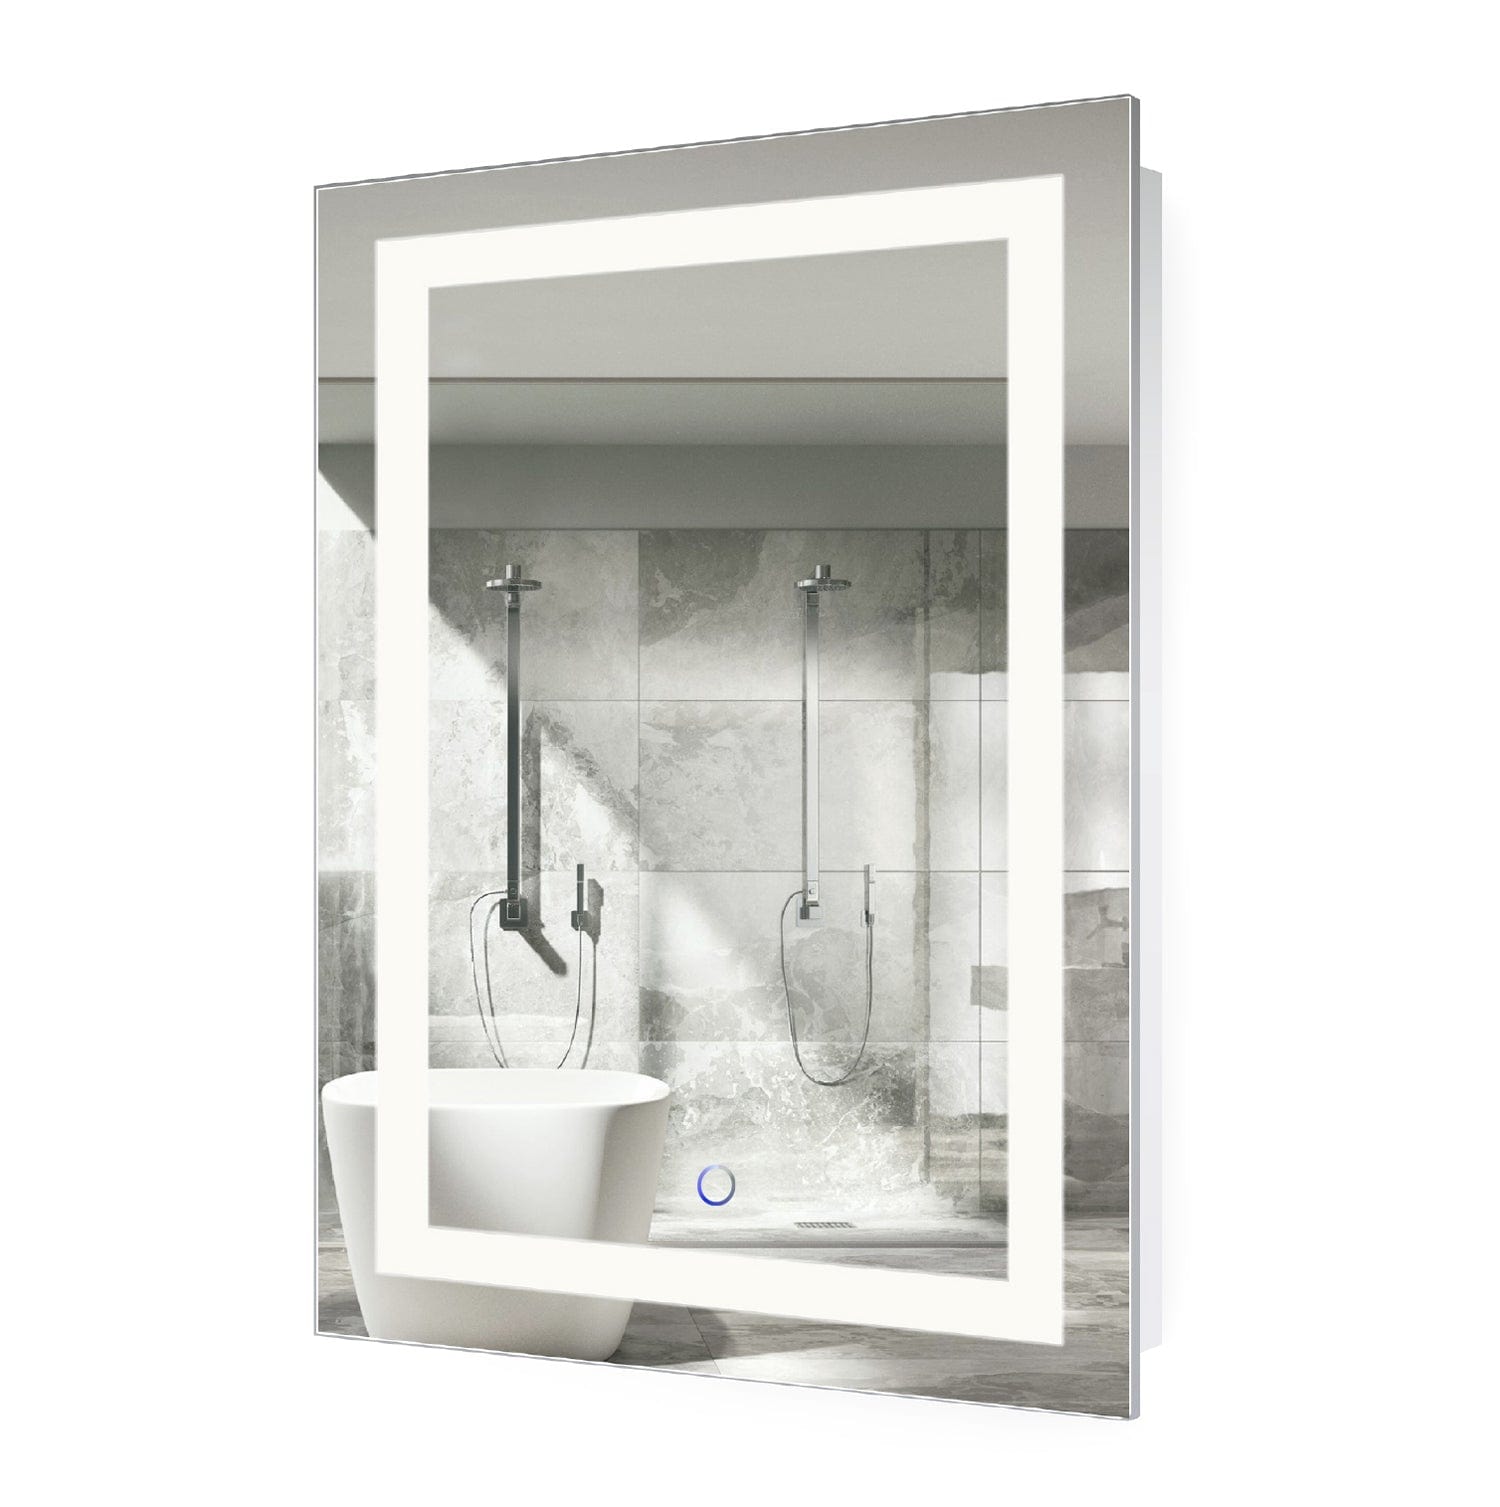 Icon 24" x 36" LED Bathroom Mirror With Dimmer & Defogger | Lighted Vanity Mirror - Molaix - Molaix601947033849Lighted Wall Mirror,RectangleICON2436